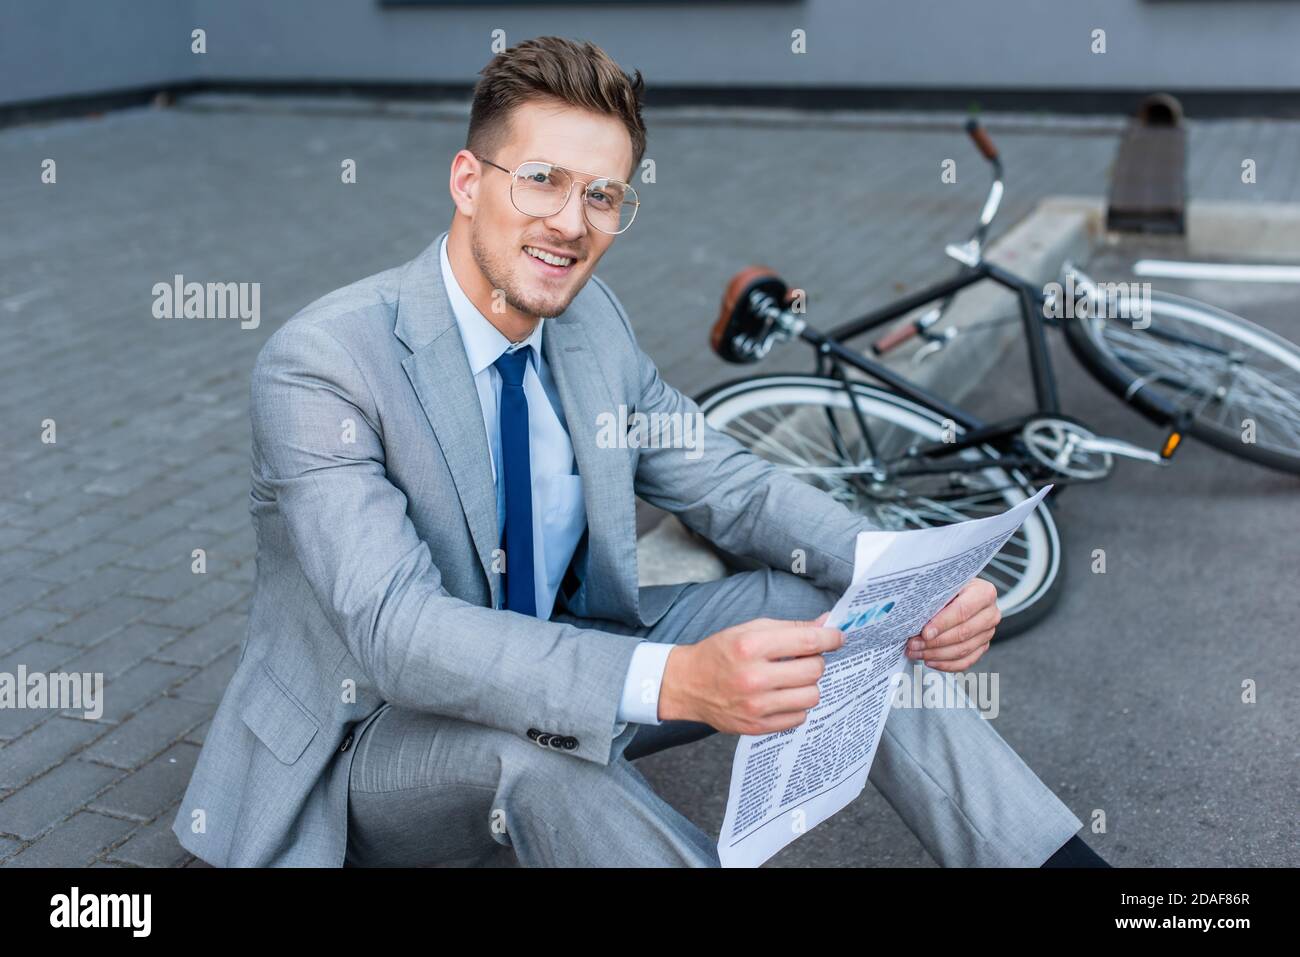 Smiling businessman holding newspaper near bicycle on blurred background outdoors Stock Photo